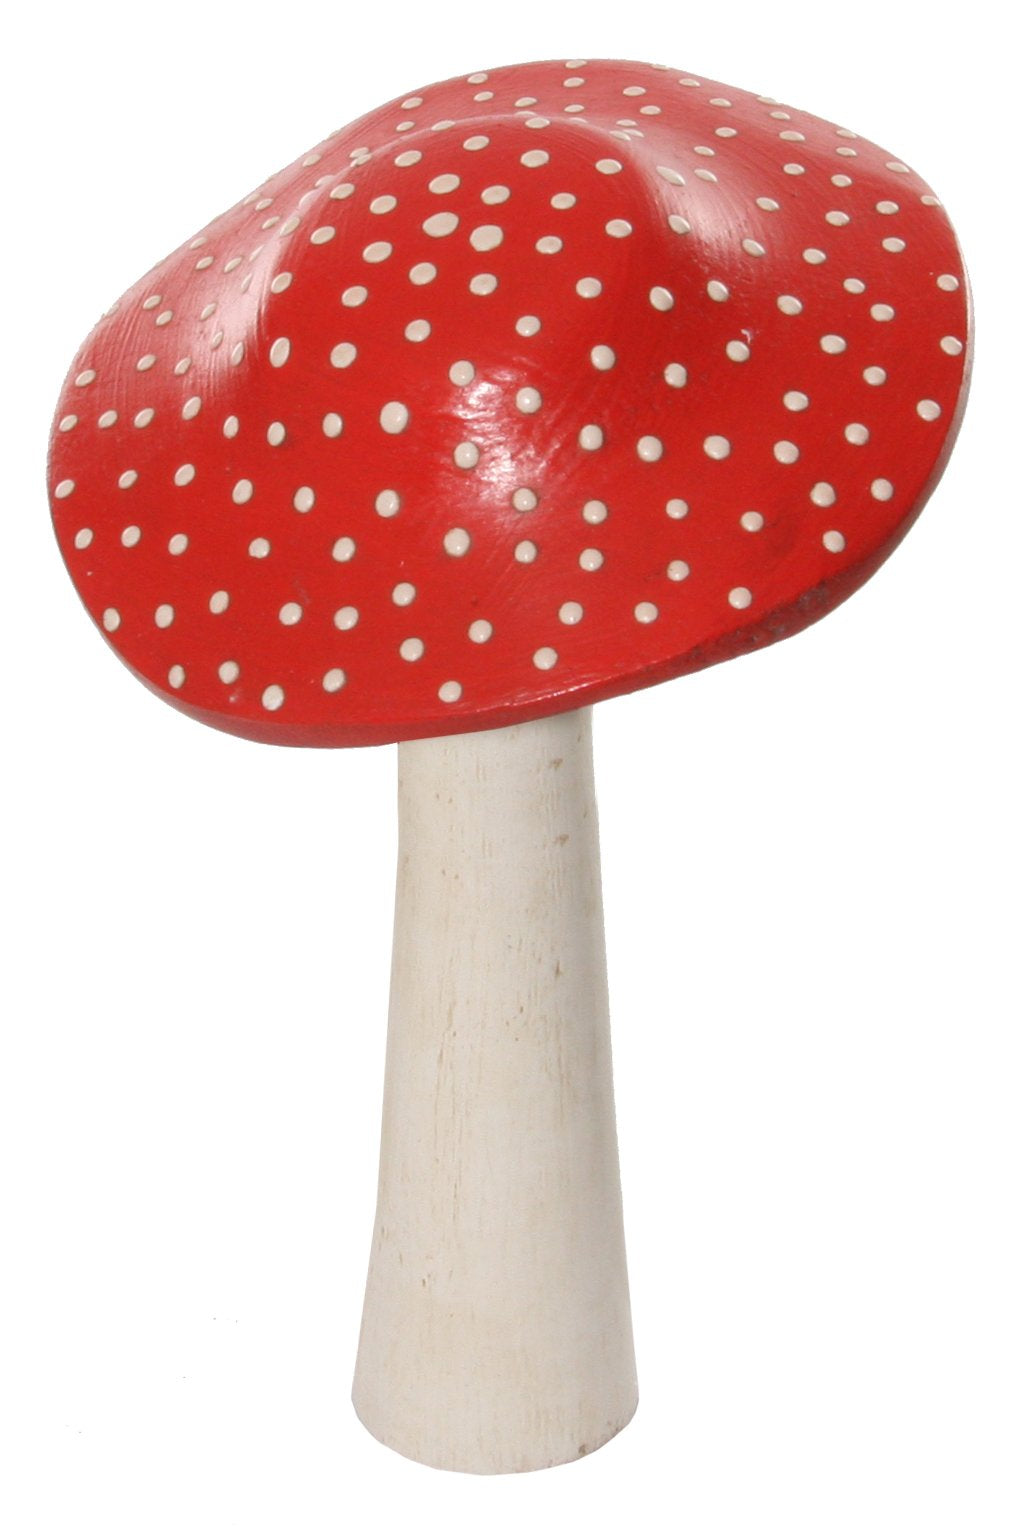 Wooden Mushroom - Red with White Dots 6